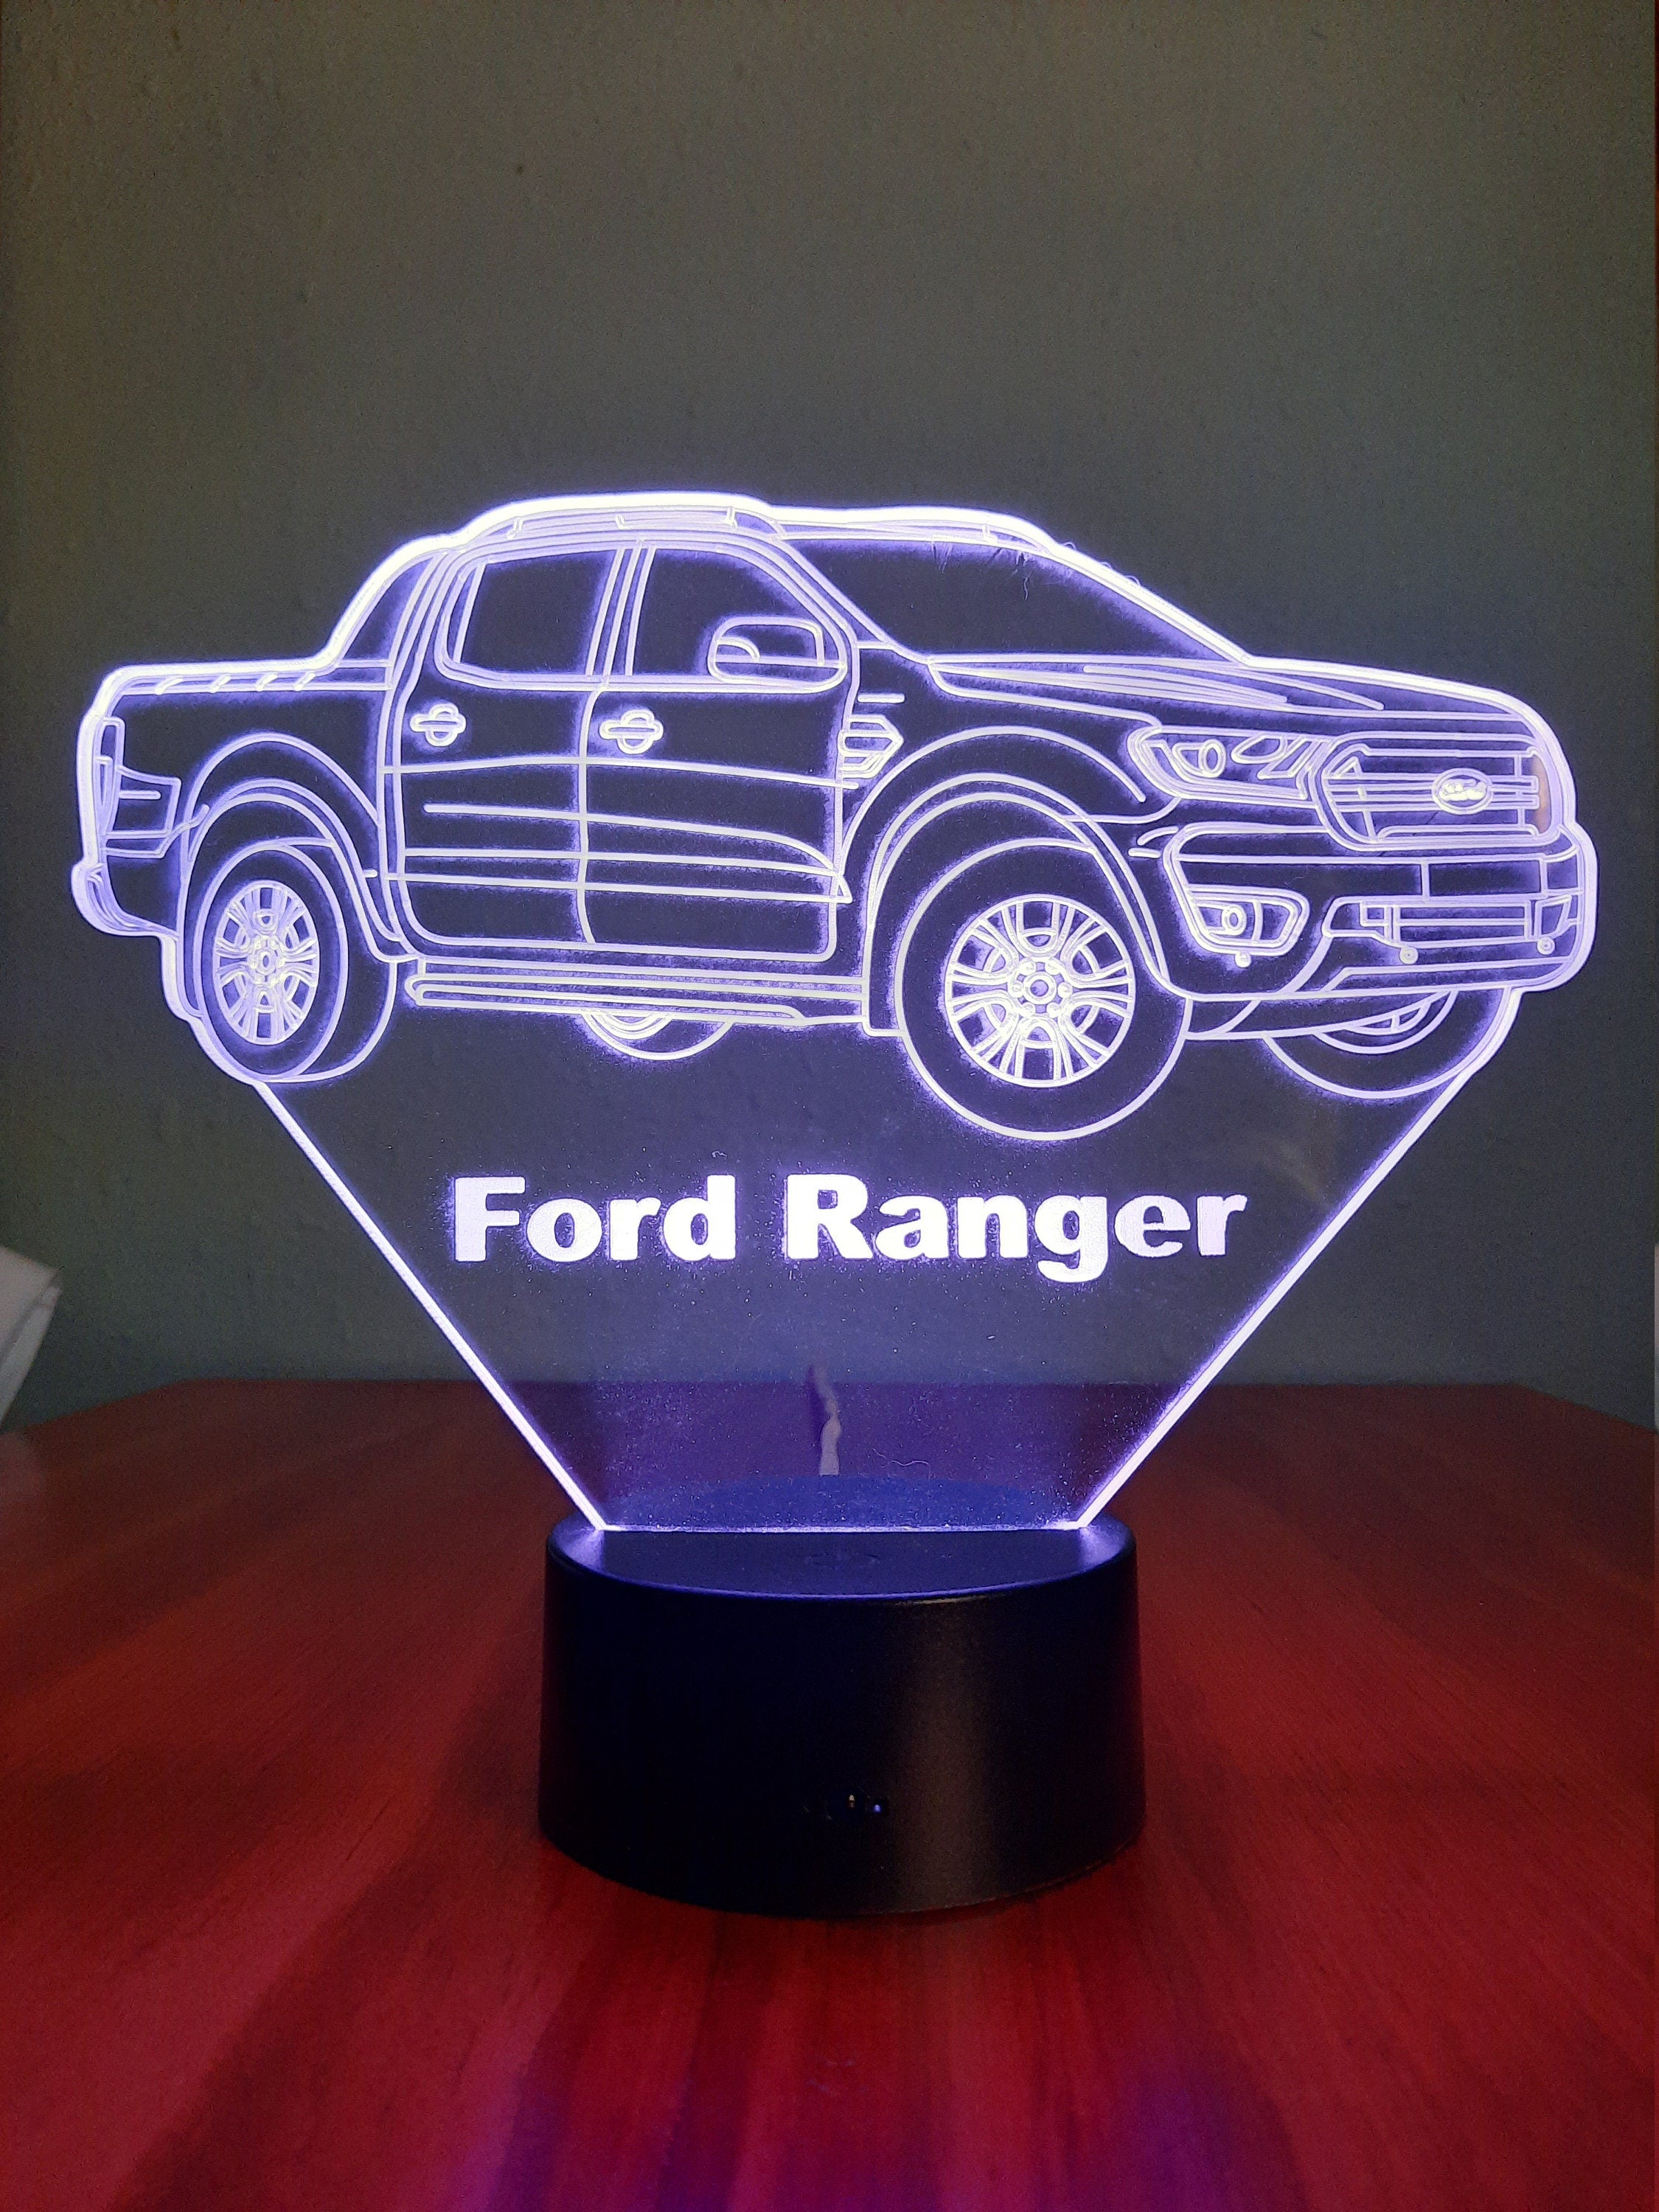 Awesome "Ford Ranger" 3D LED lamp (1229) - FREE SHIPPING!